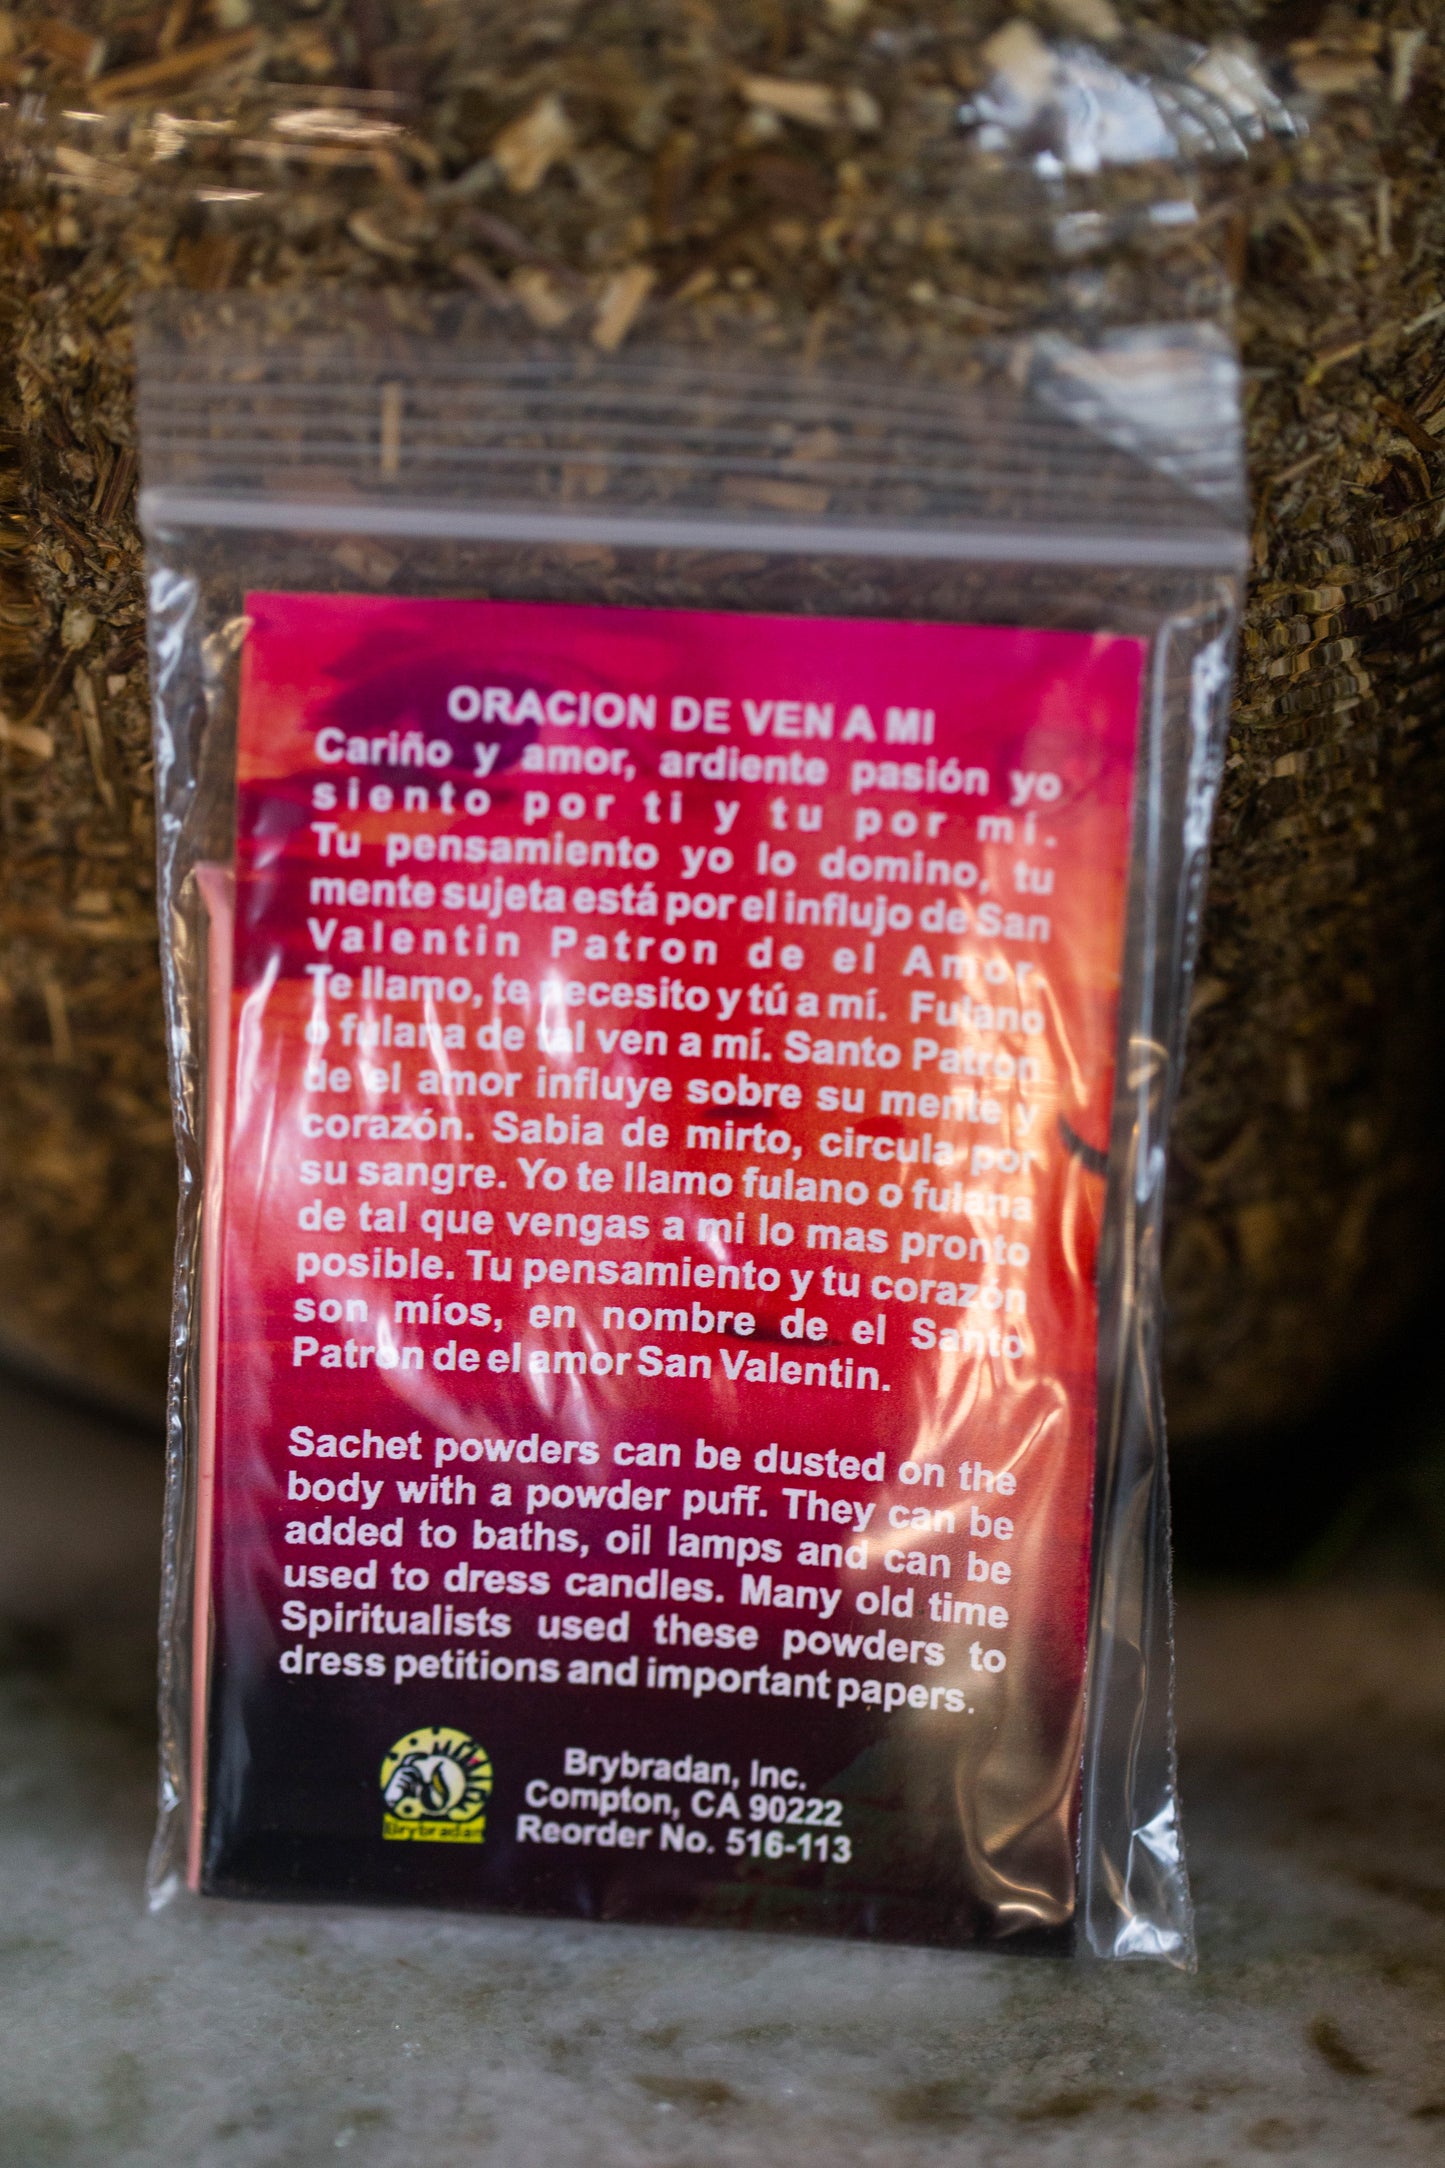 Polvo Mistico- COME TO ME - Sachet Powder for attracting love, bringing someone back, attract someone special, attract friendship